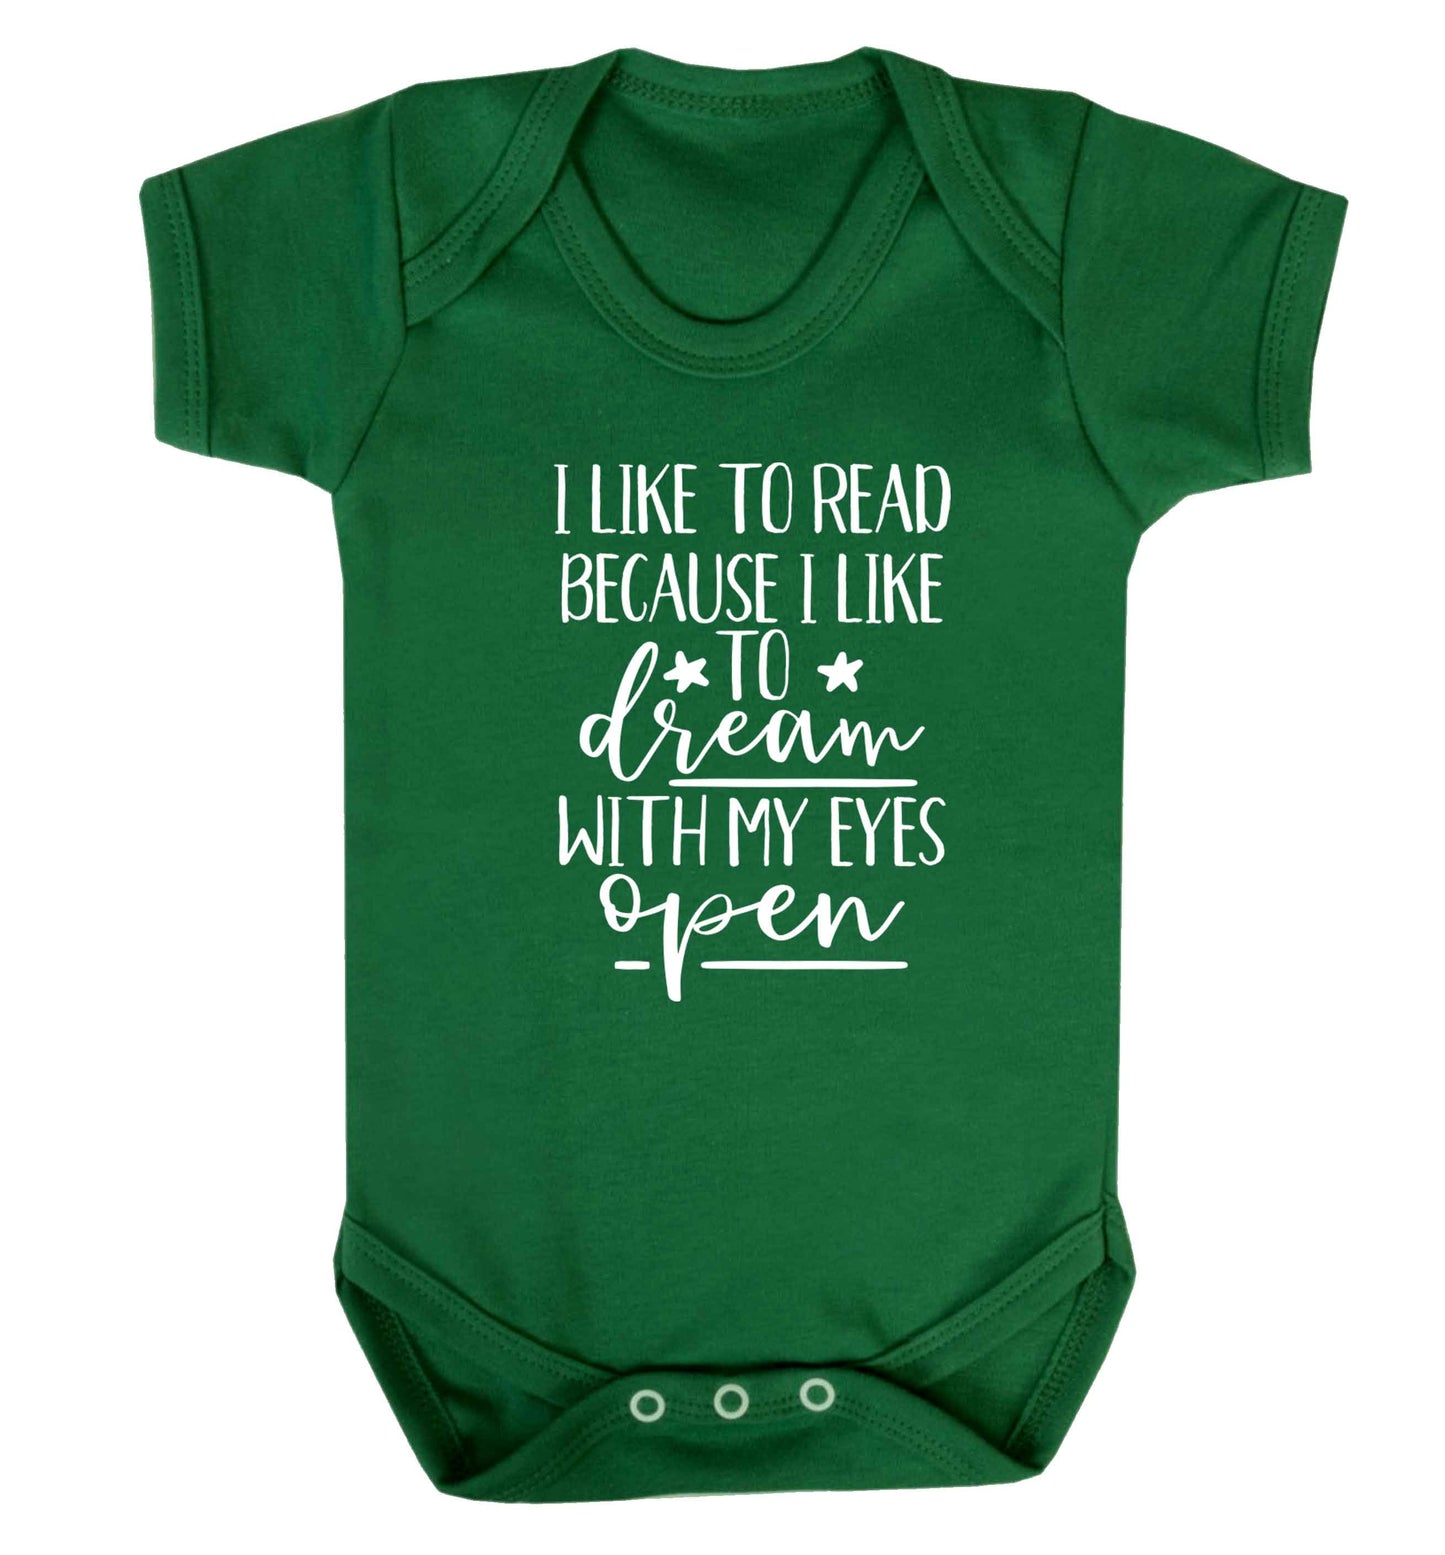 I like to read because I like to dream with my eyes open Baby Vest green 18-24 months